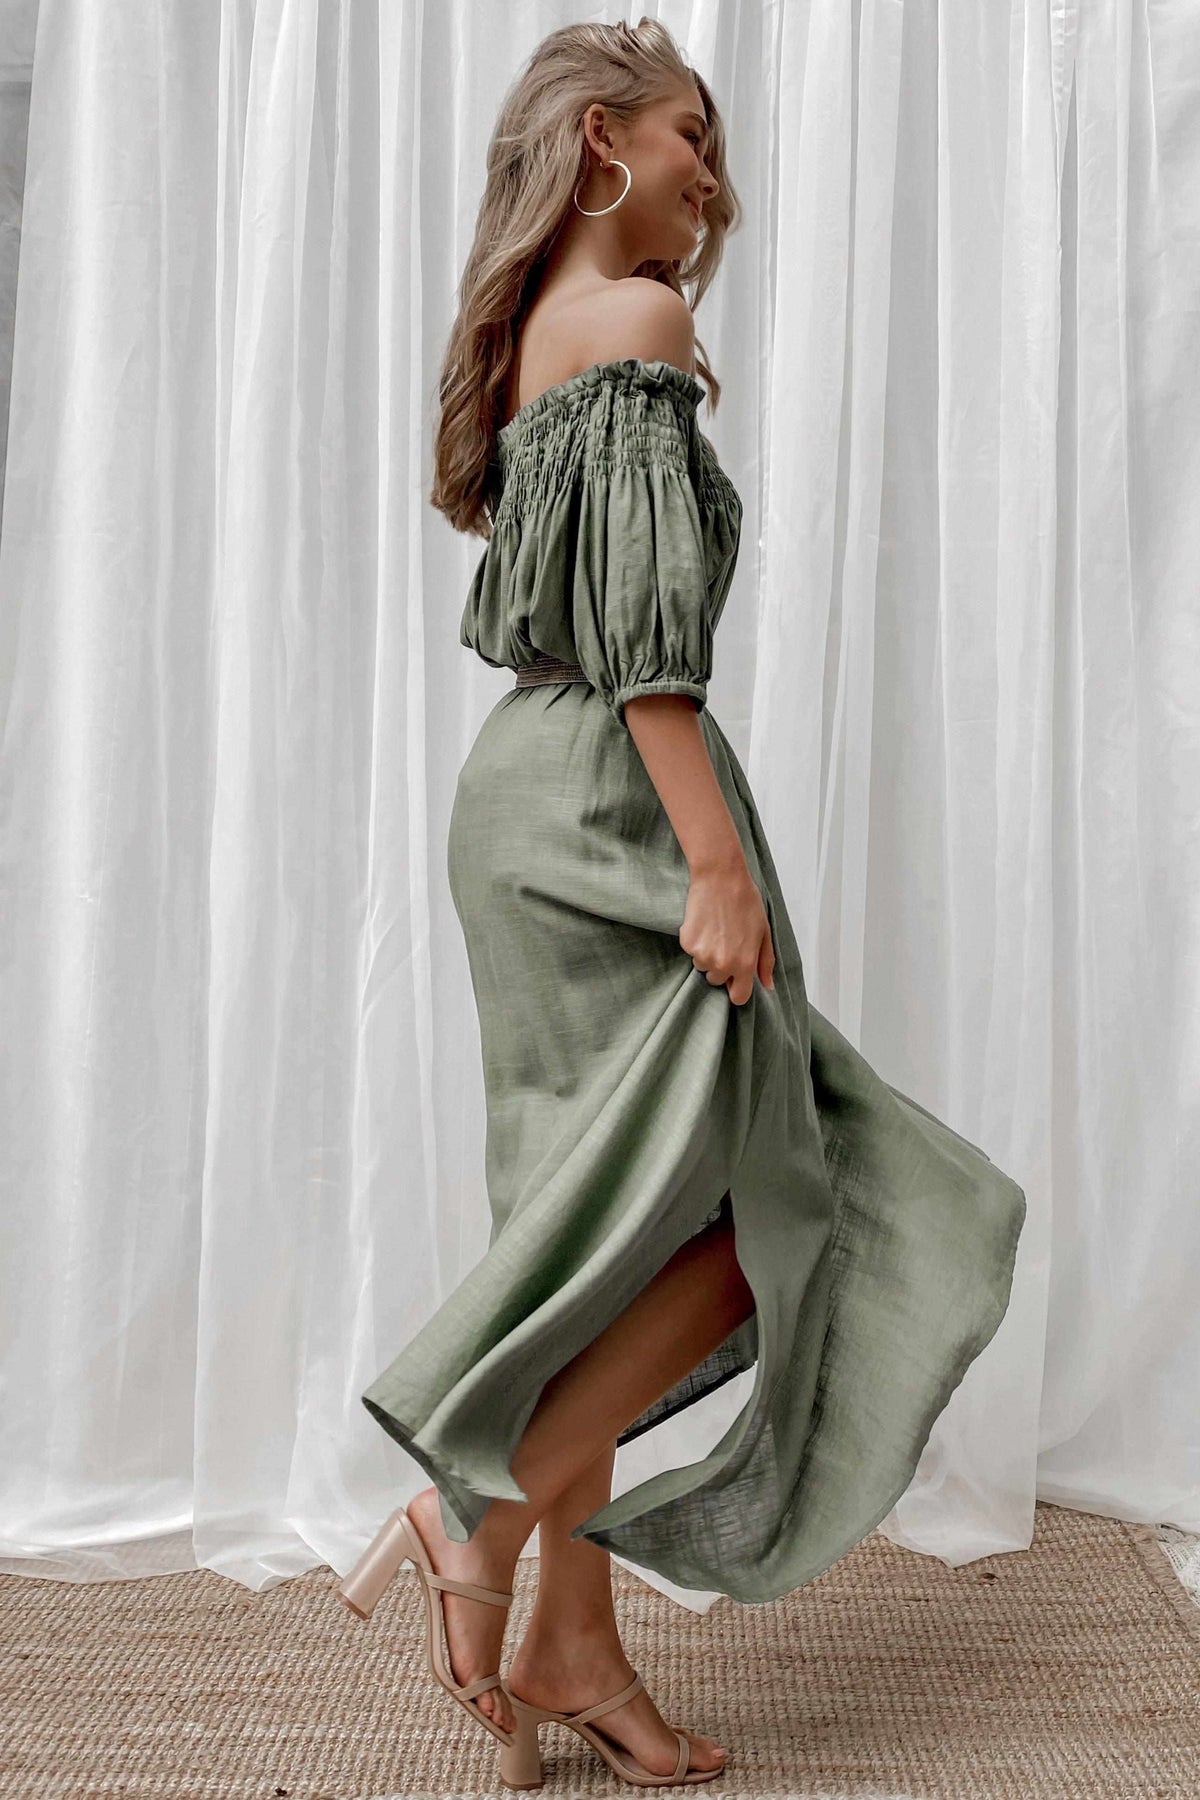 Sarsha Skirt, BOTTOMS, GREEN, MAXI DRESS, Sale, SKIRTS, Shop The Latest Sarsha Skirt Only 55.00 from MISHKAH FASHION:, Our New Sarsha Skirt is only $55.00-We Have The Latest Pants | Shorts | Skirts @ Mishkah Online Fashion Boutique-MISHKAH